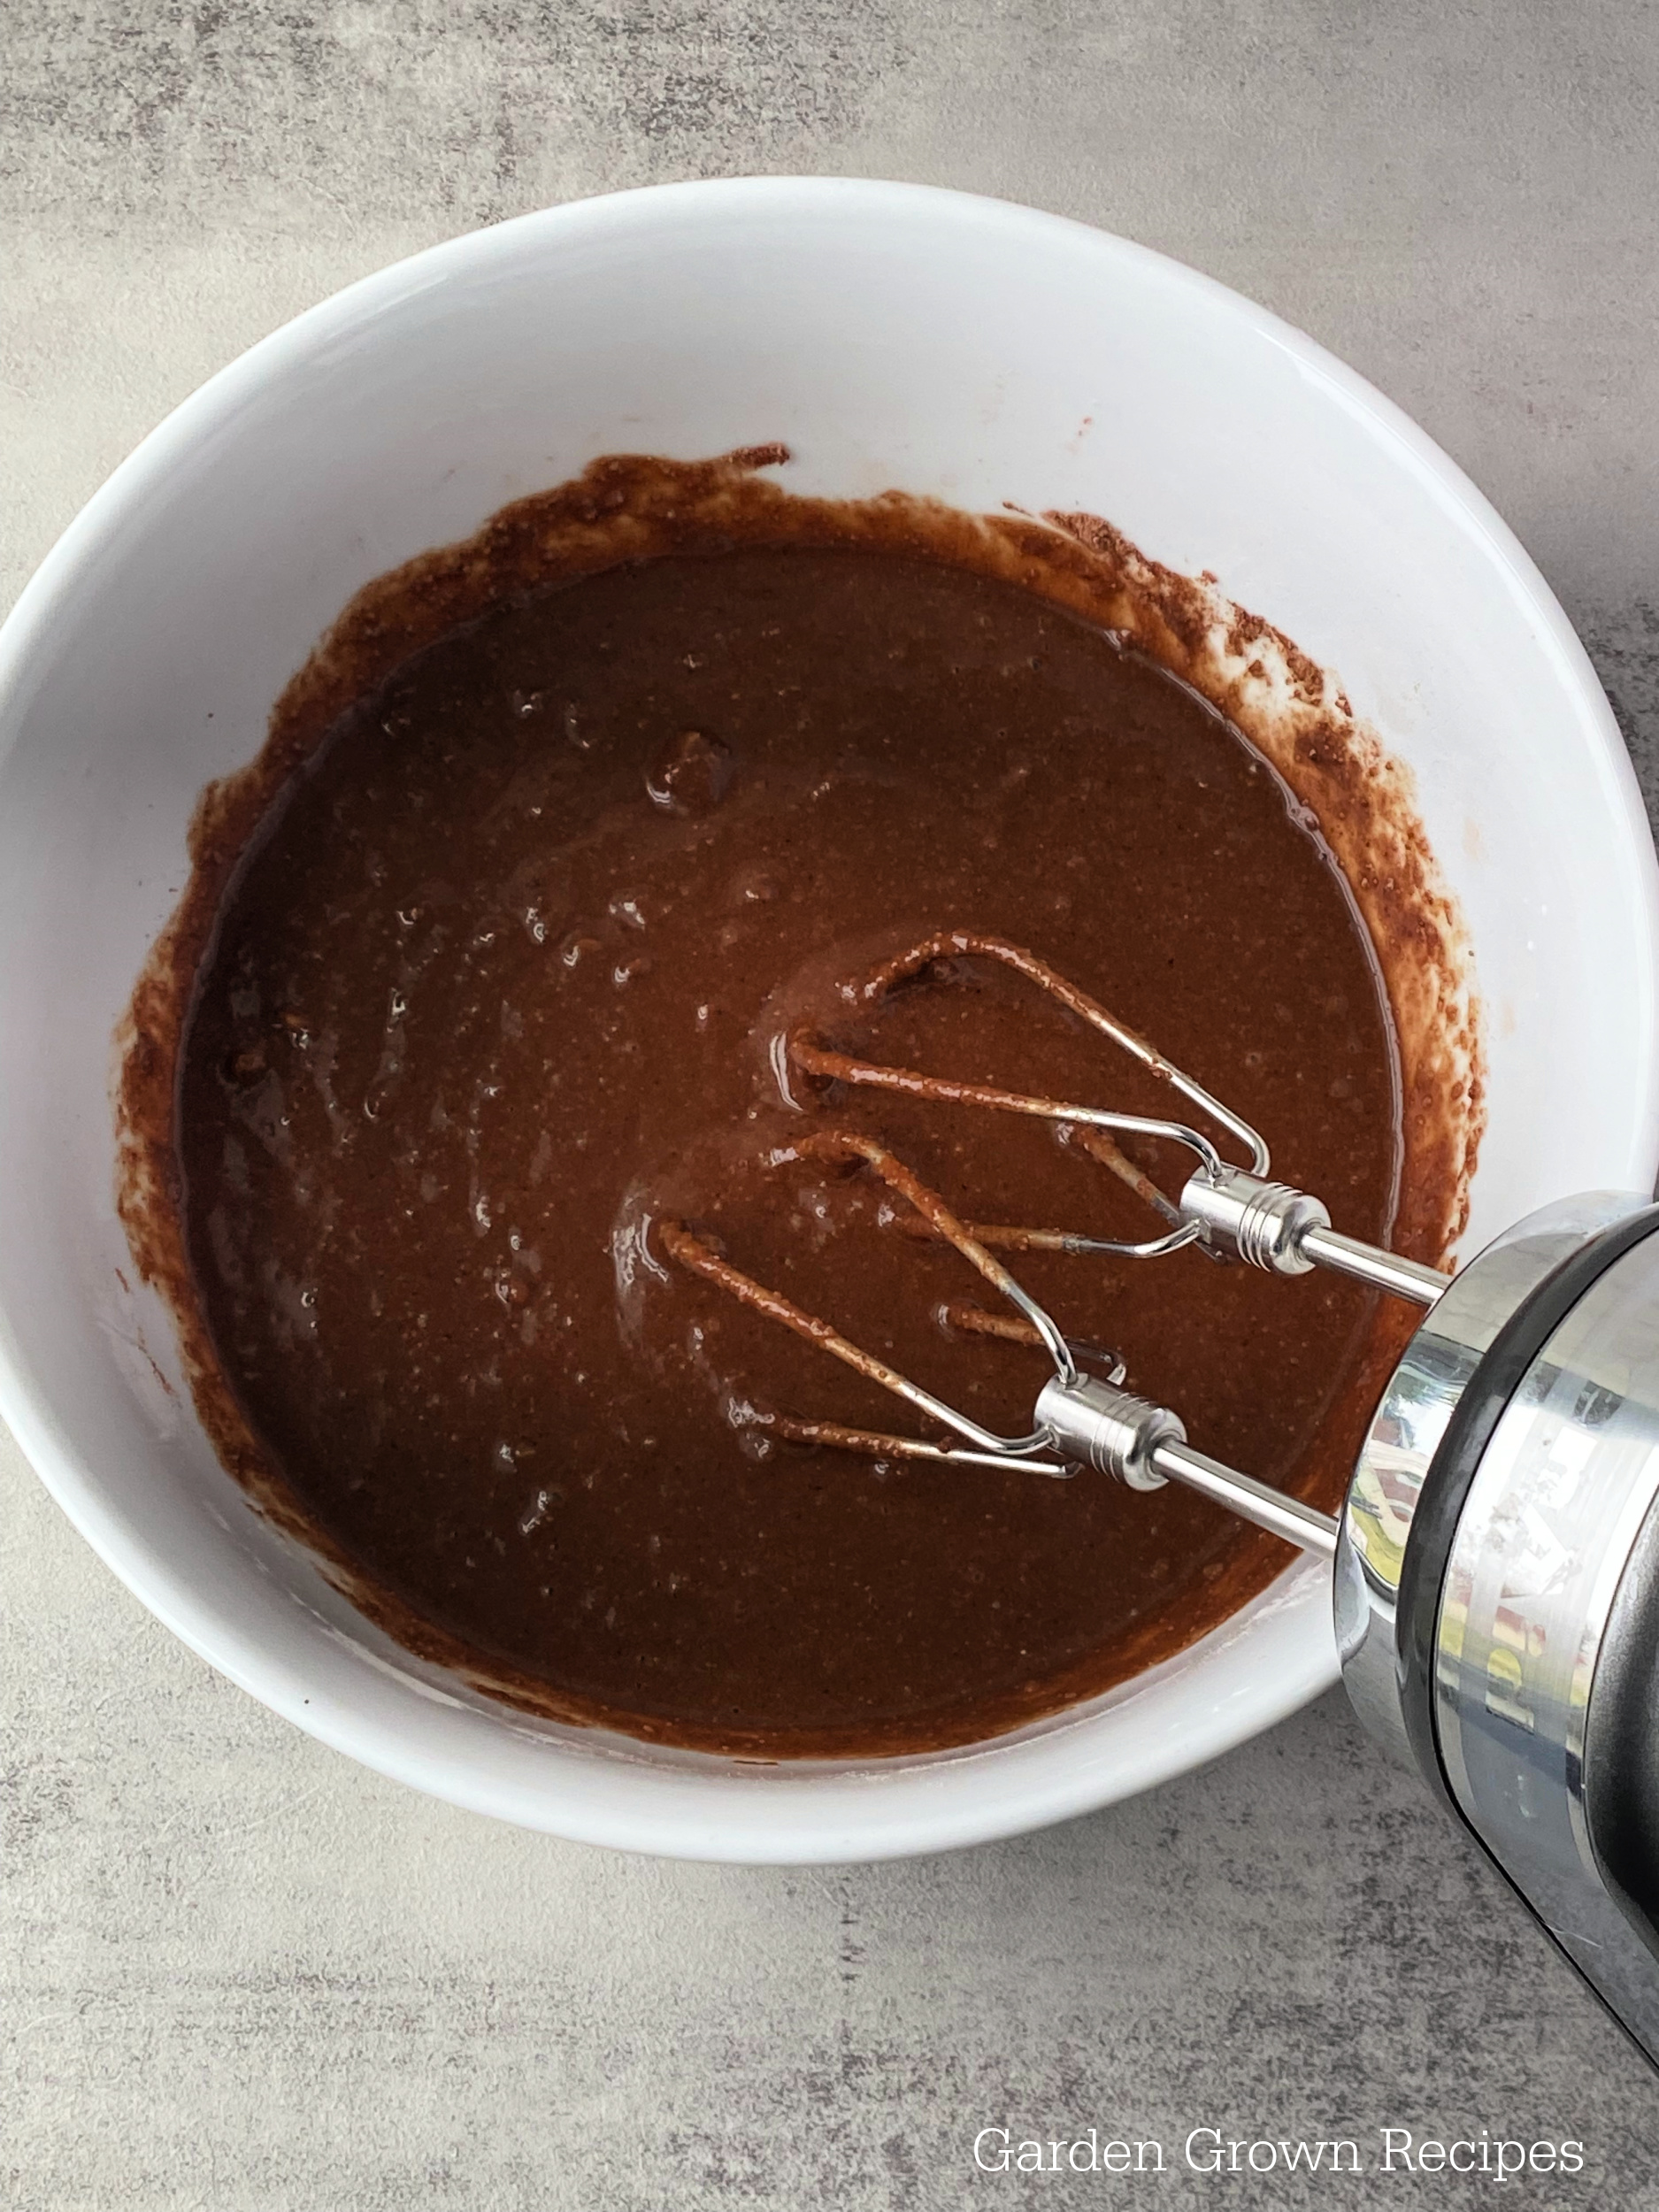 electric mixer in batter to make Baked Chocolate Cake Donut Recipe